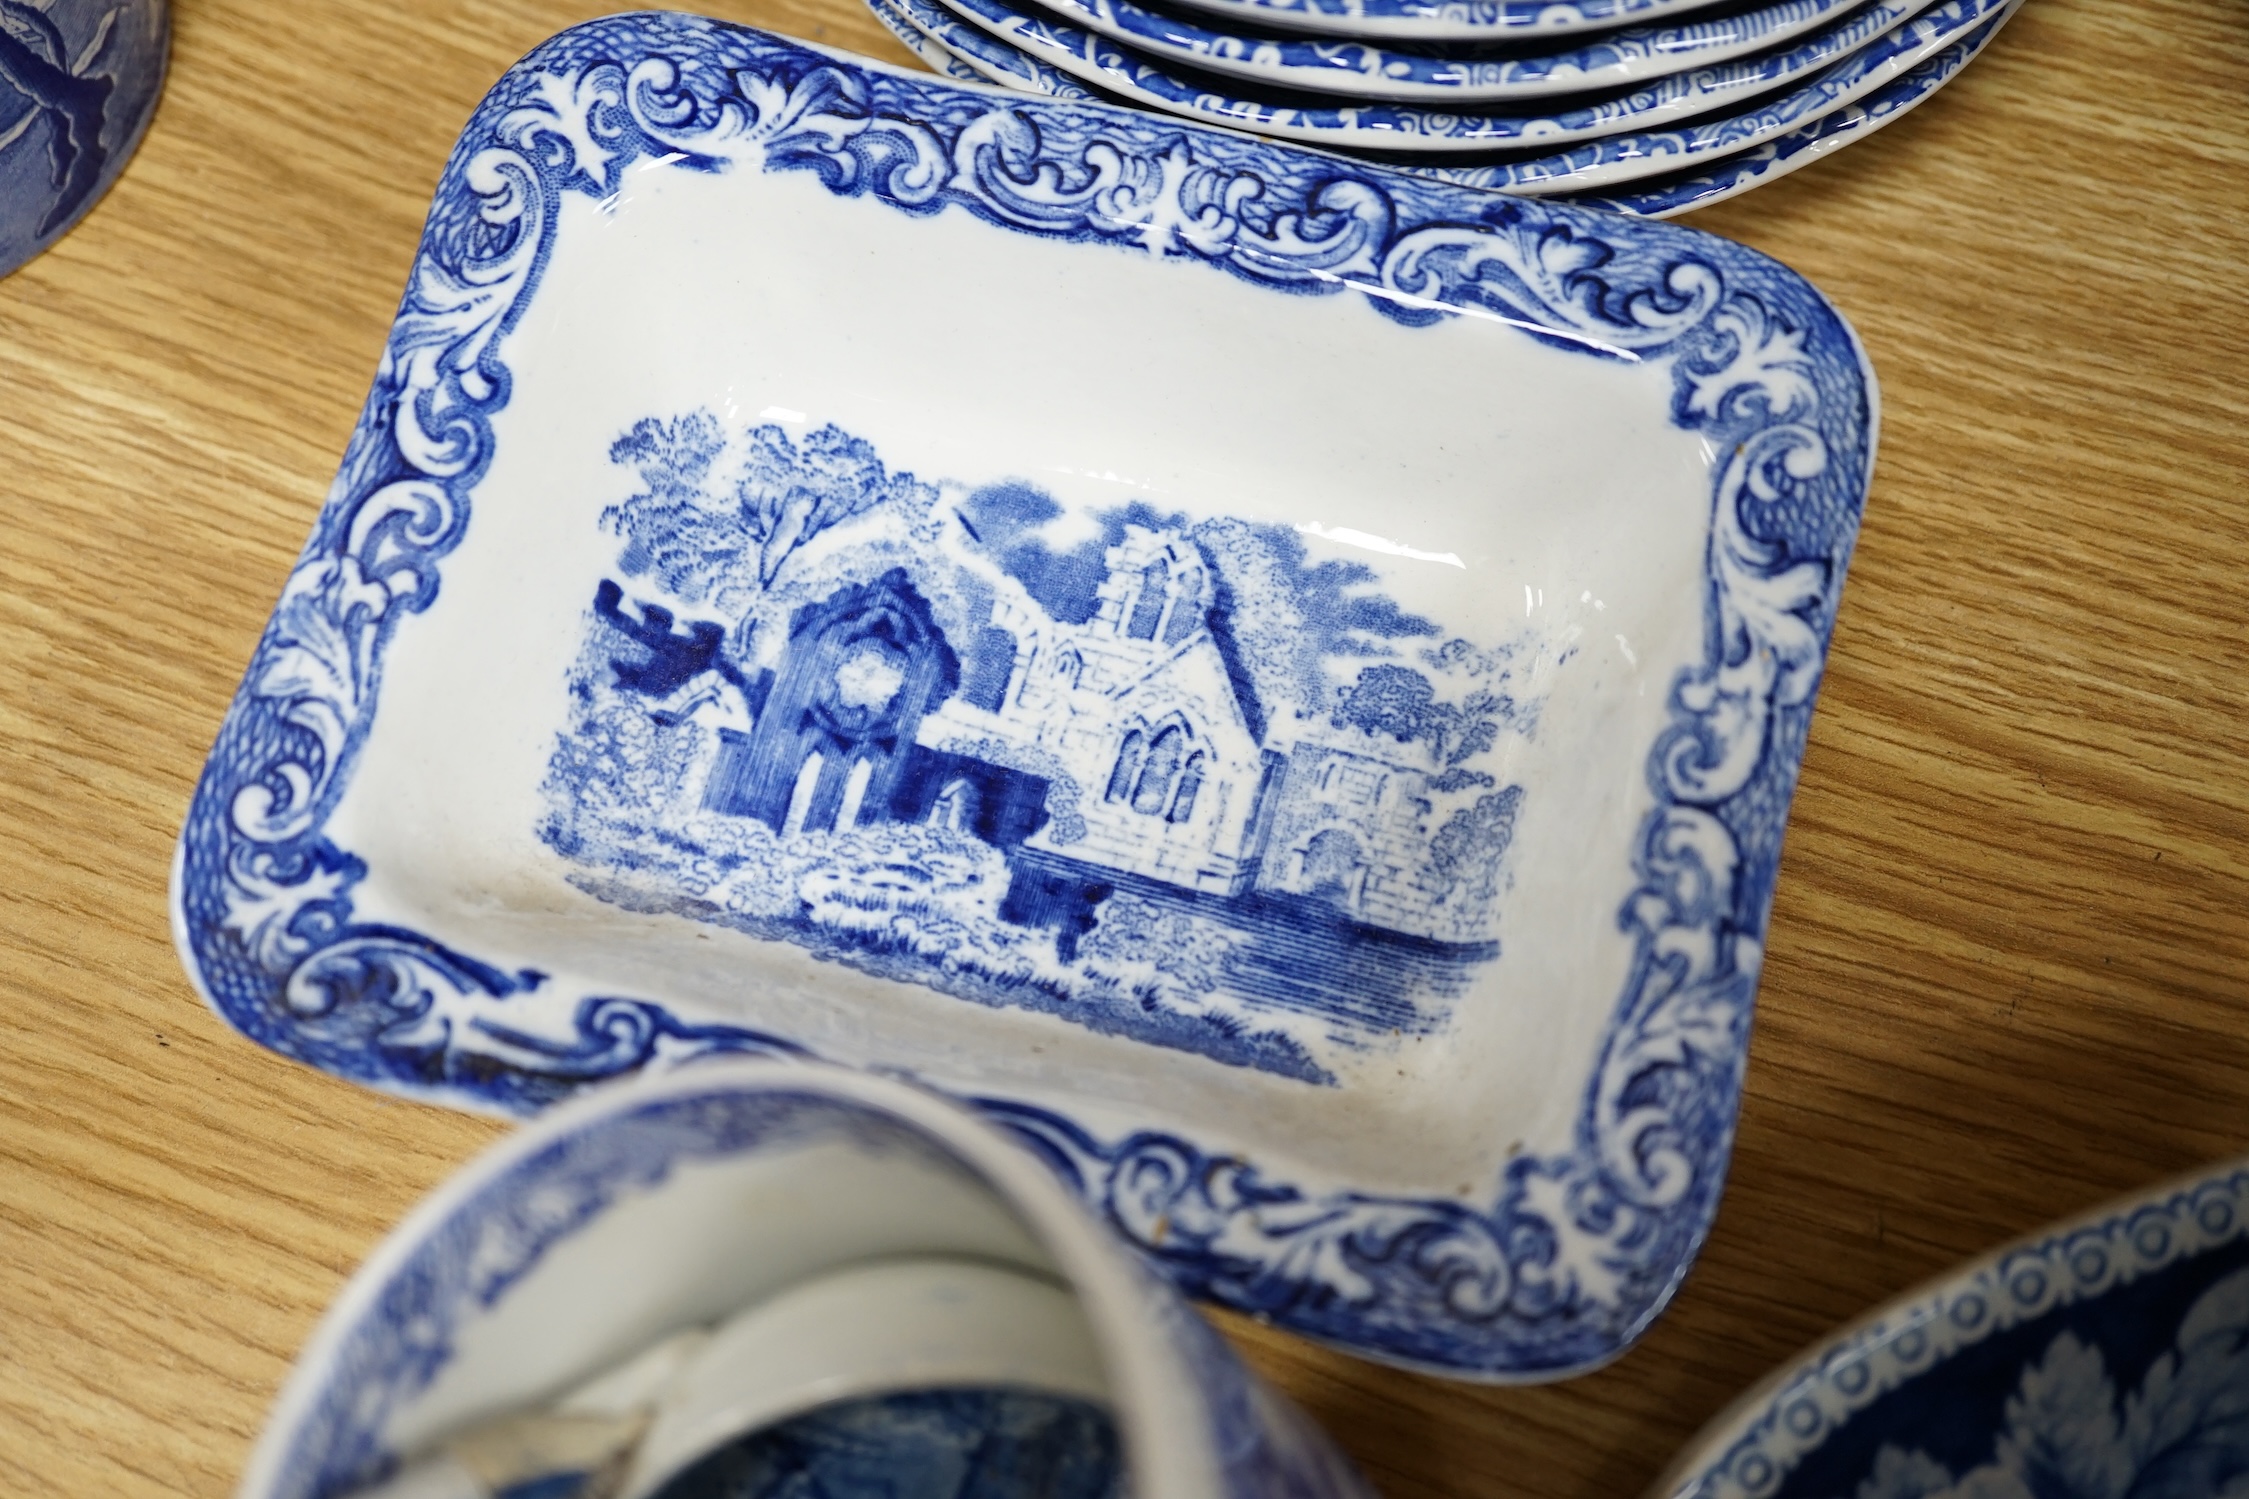 A collection of blue and white Spode Italian dinnerware to include mugs, plates and lidded tureen, largest 37cm wide. Condition - poor to fair